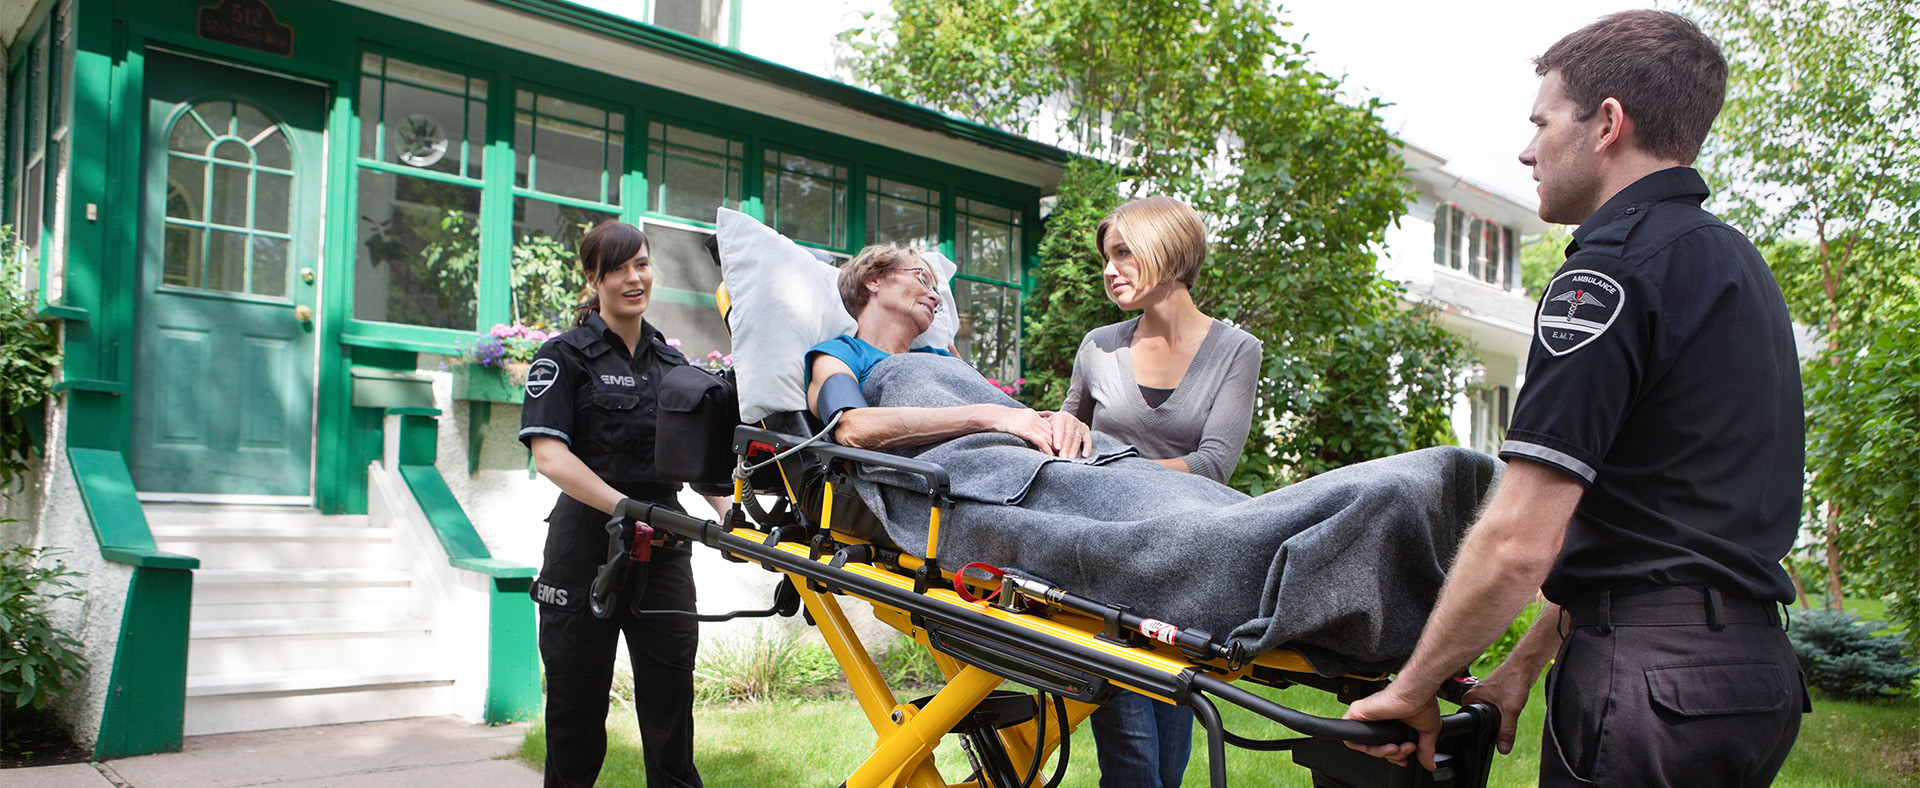 Senior Woman on Ambulance Stretcher Being Helped by EMT